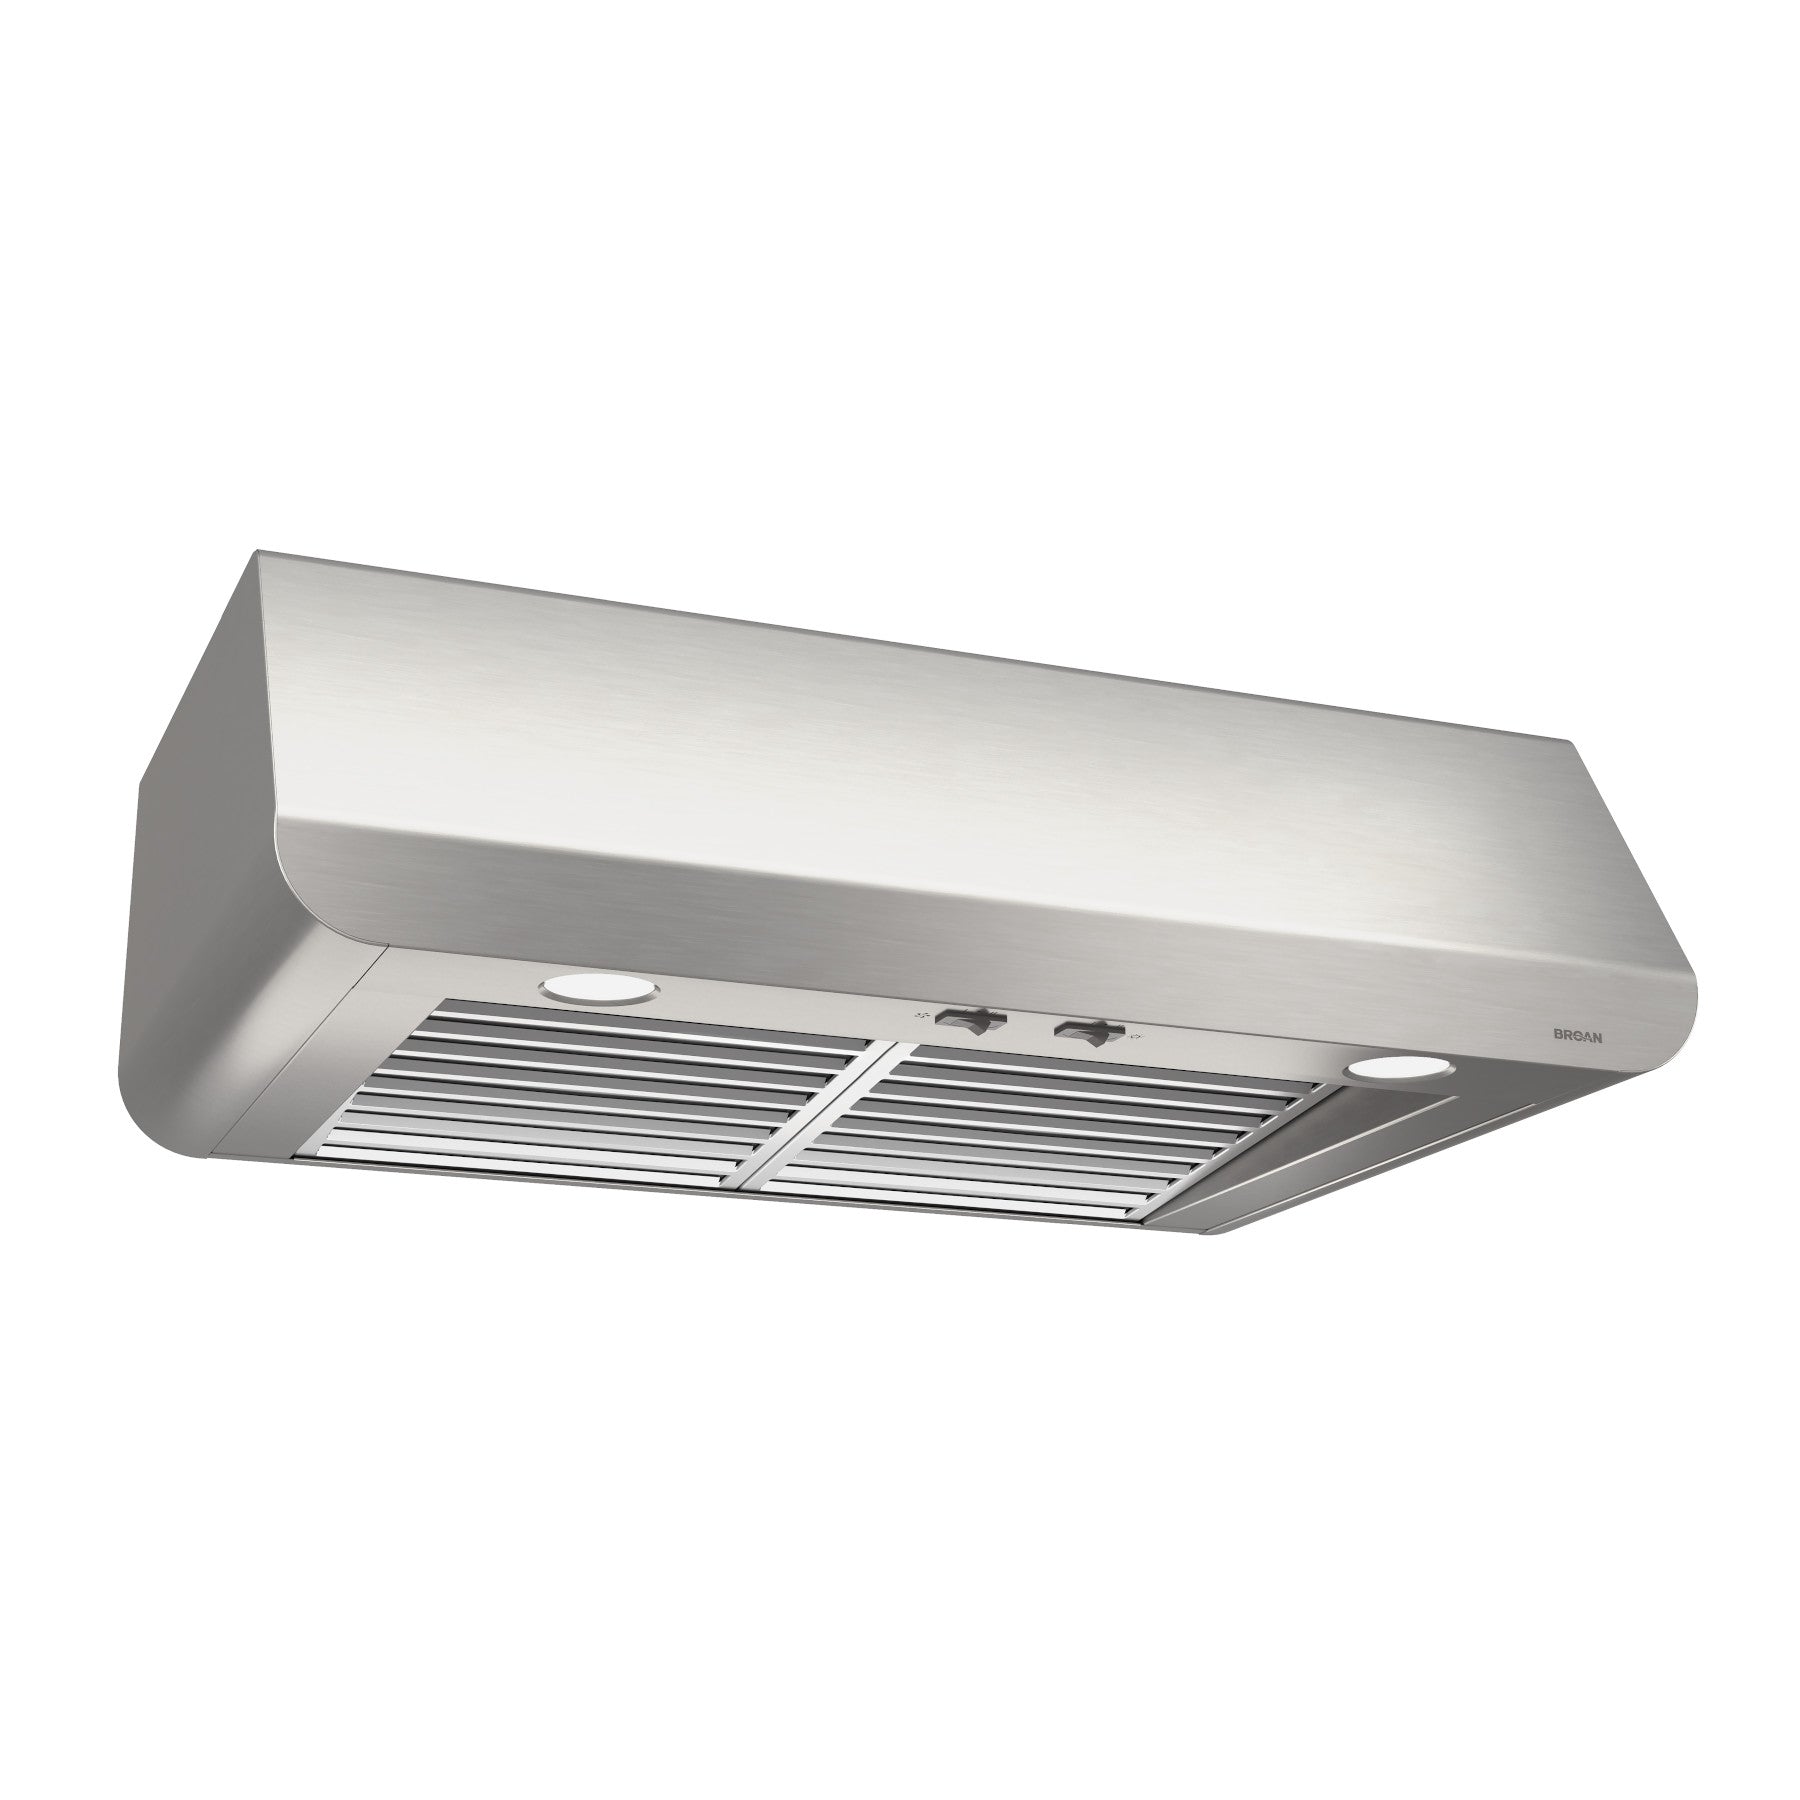 Broan - 30 Inch 400 CFM Under Cabinet Range Vent in Stainless - BPDC130SS